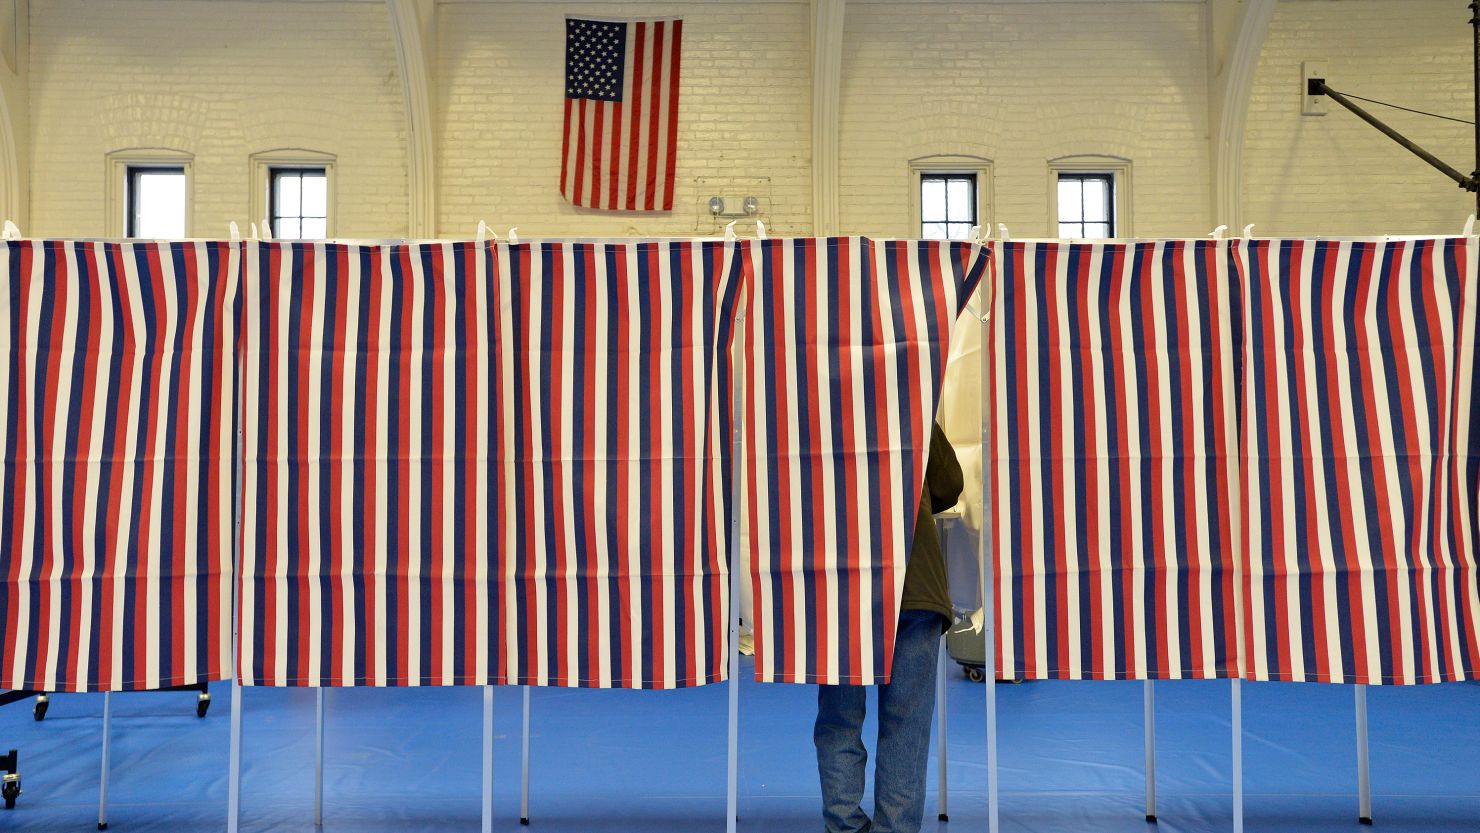 Voting booths filled the the Ward Five Community Center during the New Hampshire primary in Concord, New Hampshire on February 11, 2020. (Photo by Joseph Prezioso/AFP/Getty Images)